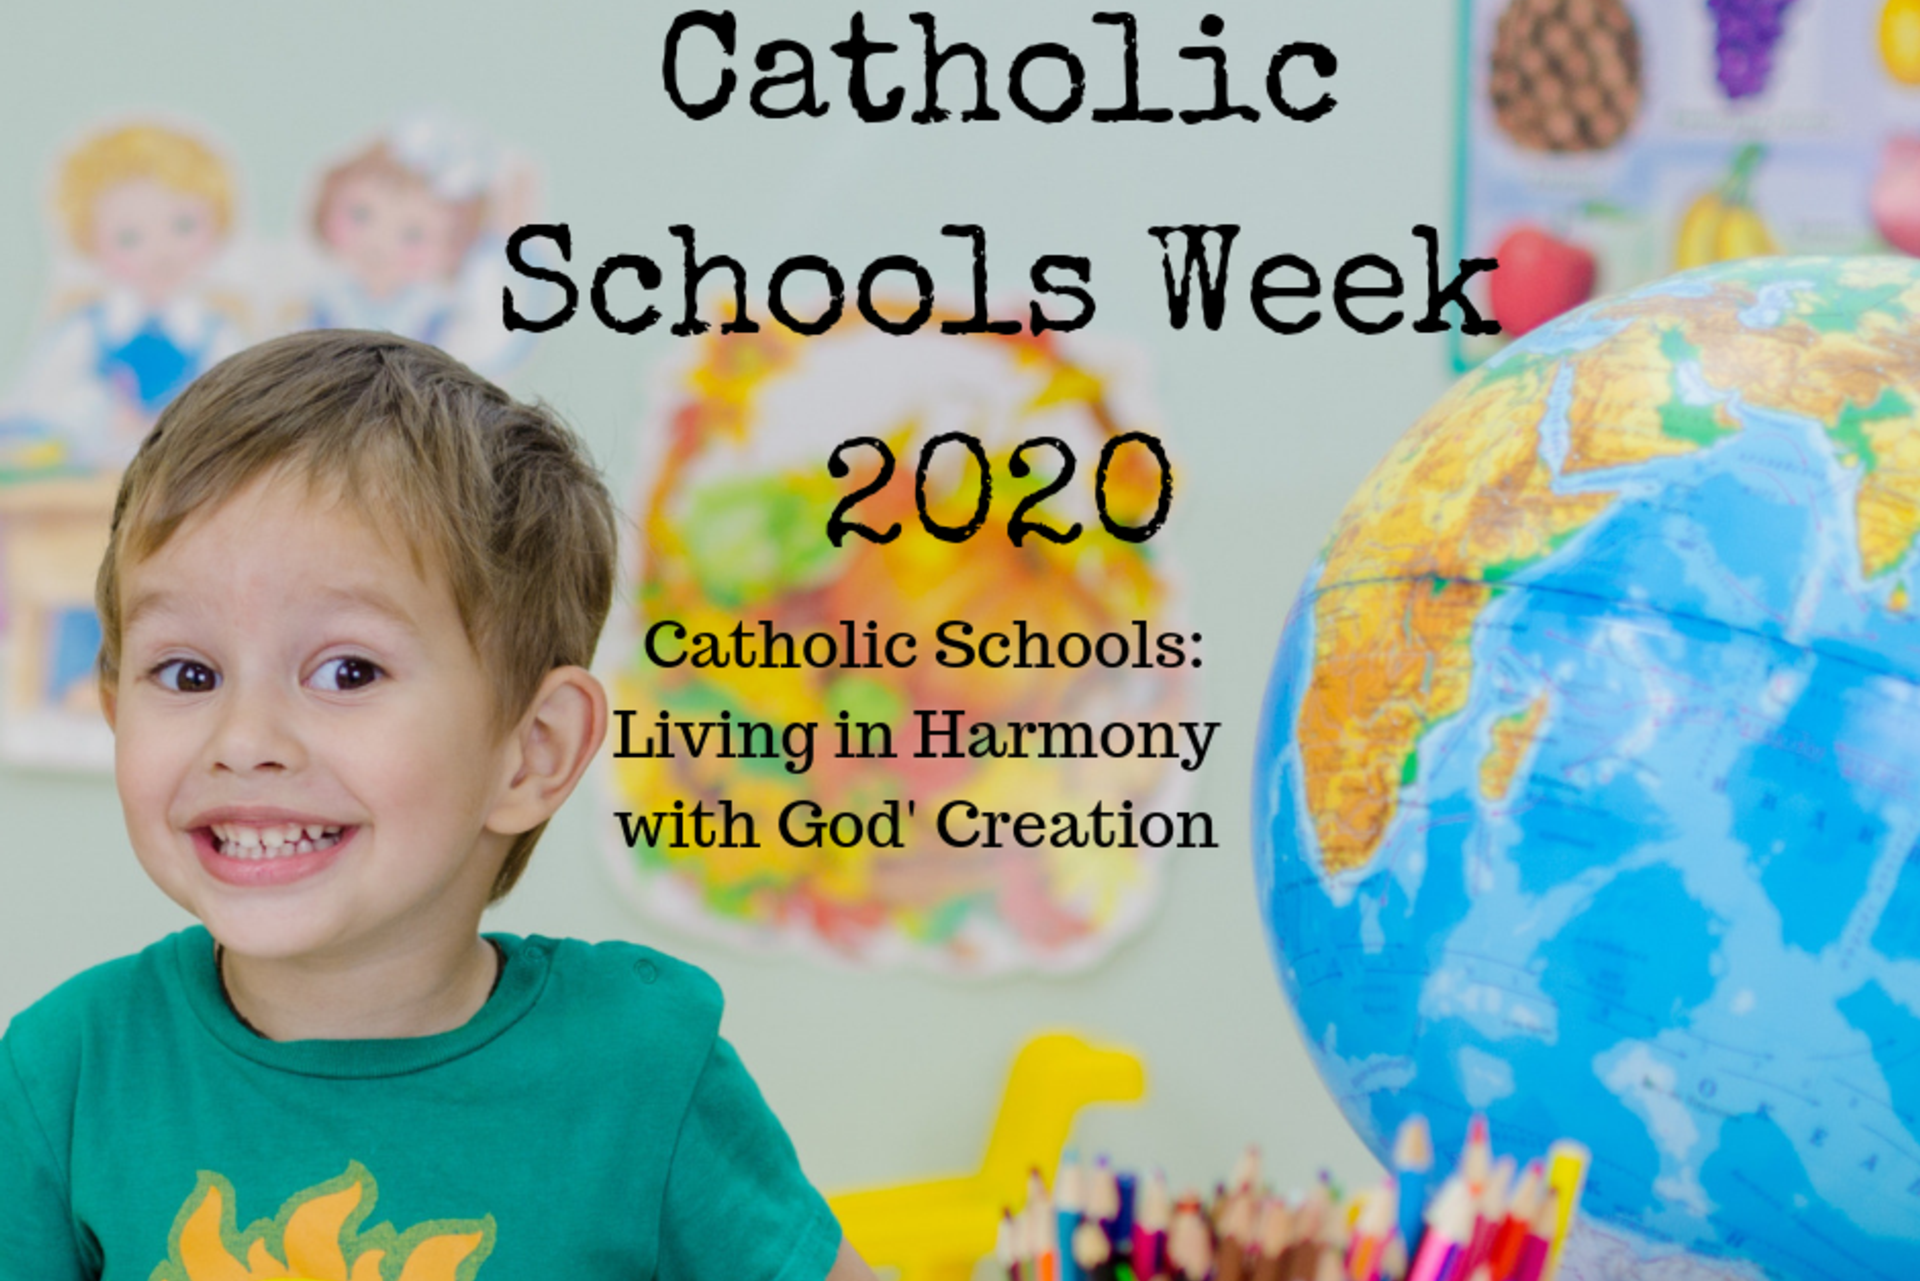 New audio and Resources for Thursday of Catholic Schools Week 2020